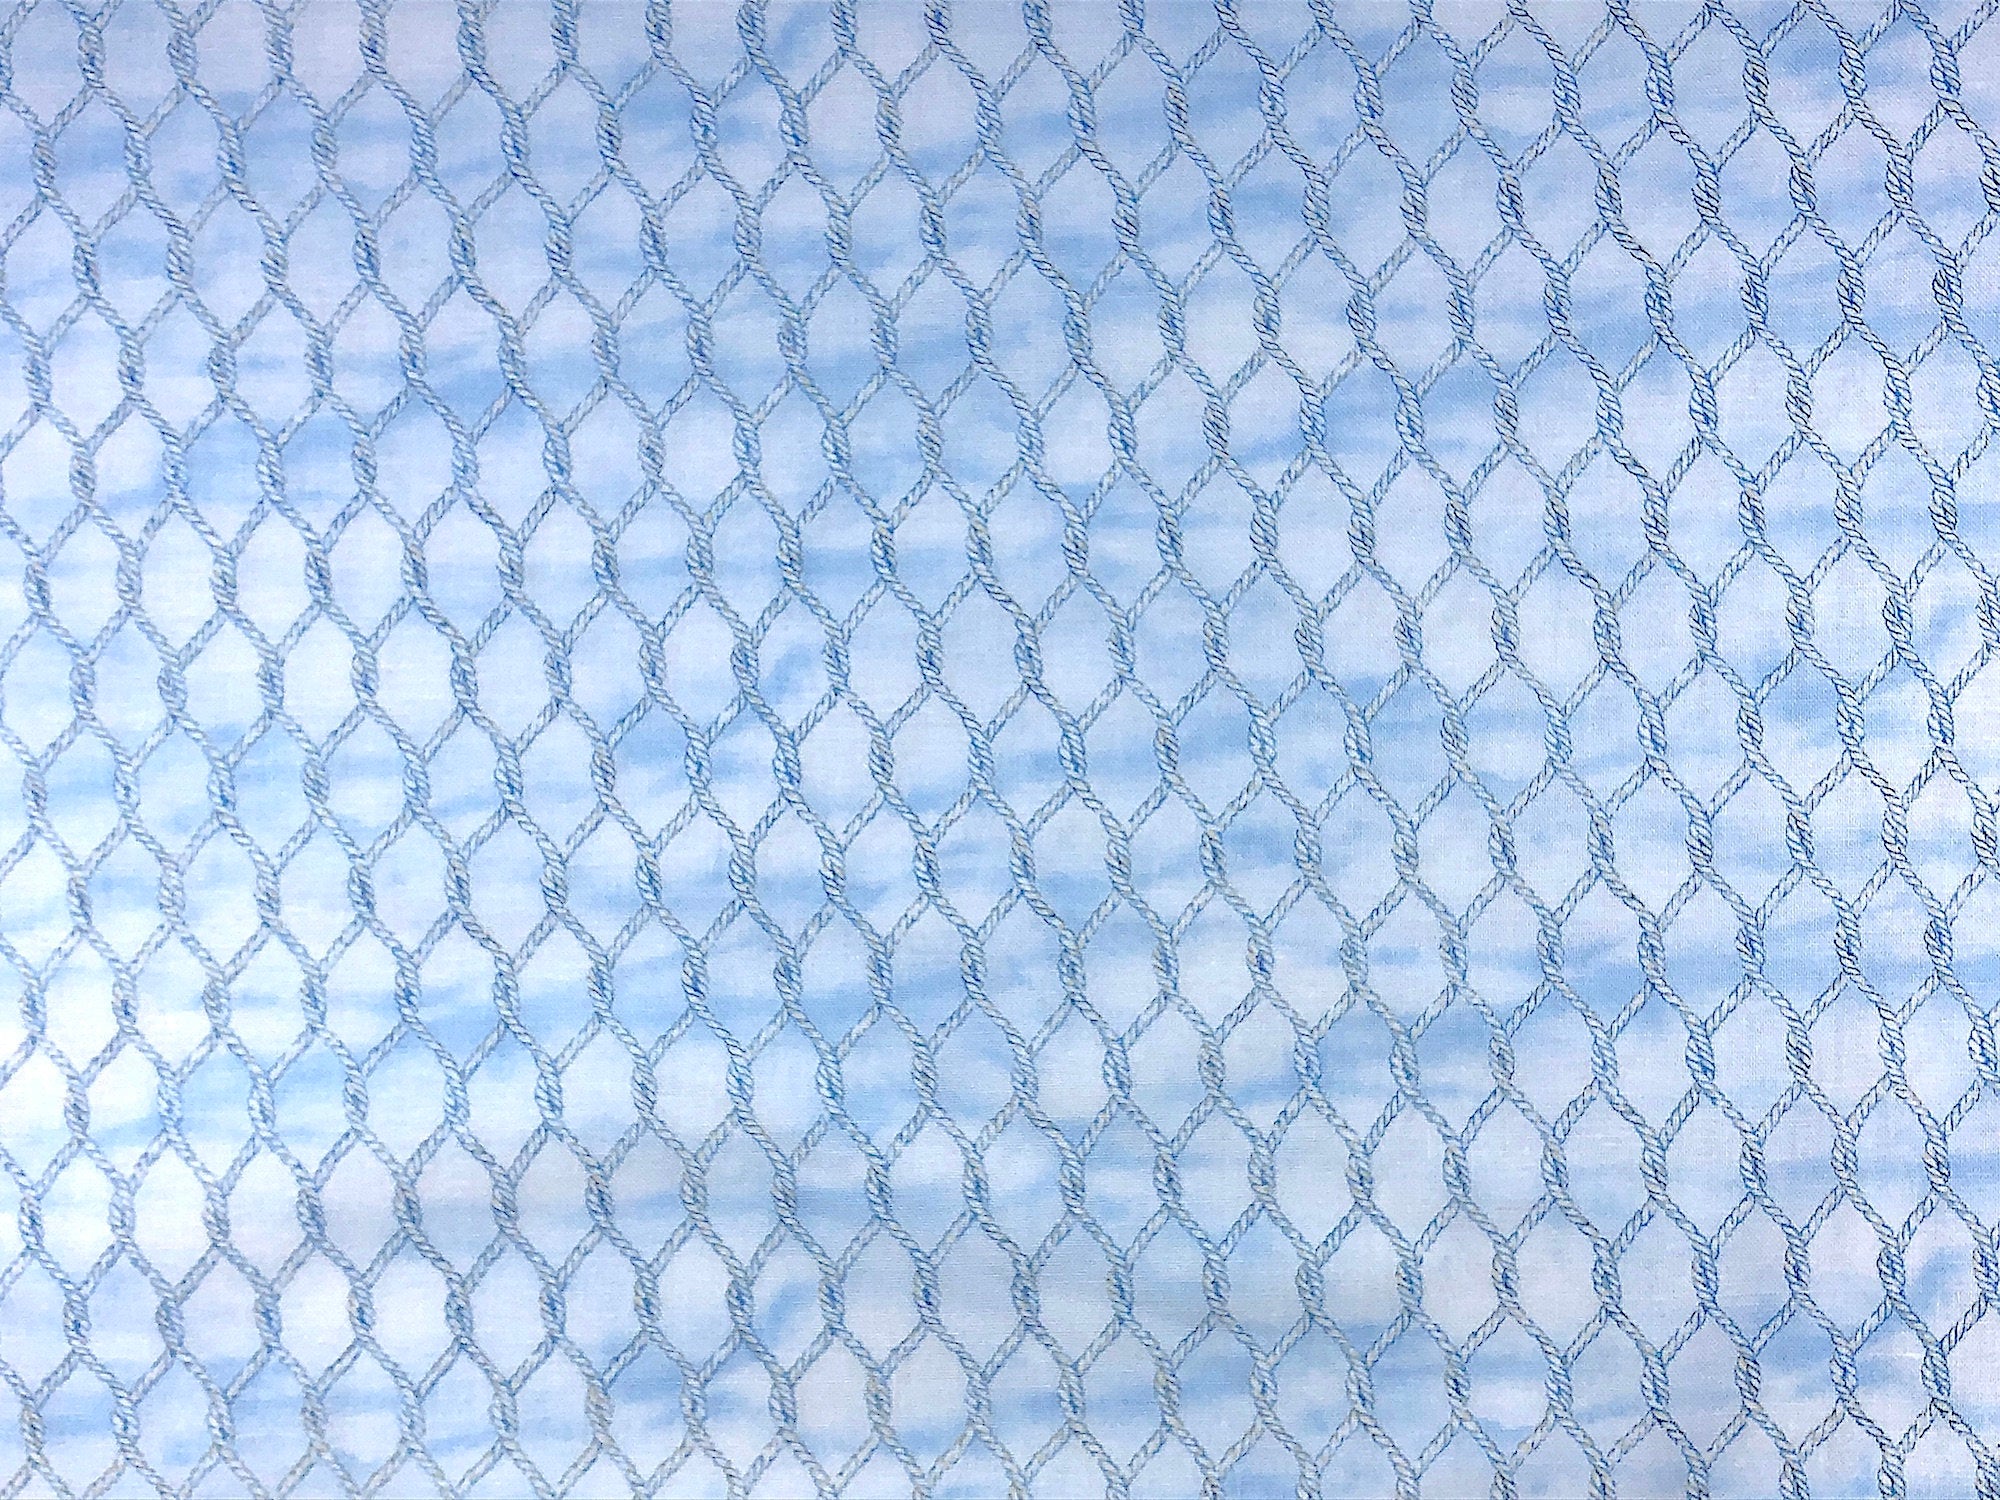 This fabric is part of the Harbor Lights collection and is covered with a rope netting